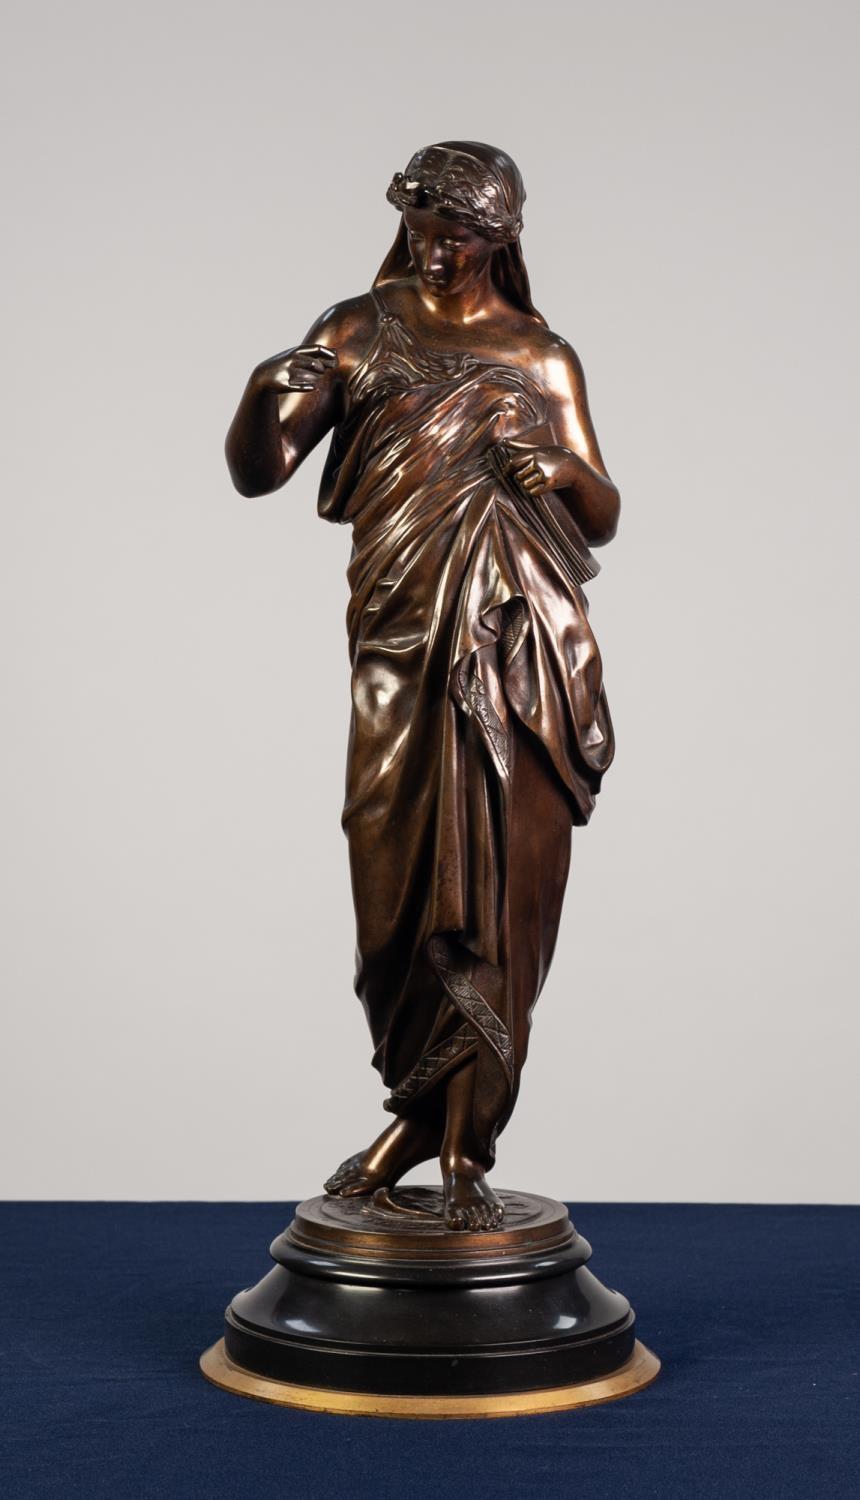 NINETEENTH CENTURY BRONZE CLASSICAL FEMALE FIGURE, modelled standing in flowing dress, carrying a